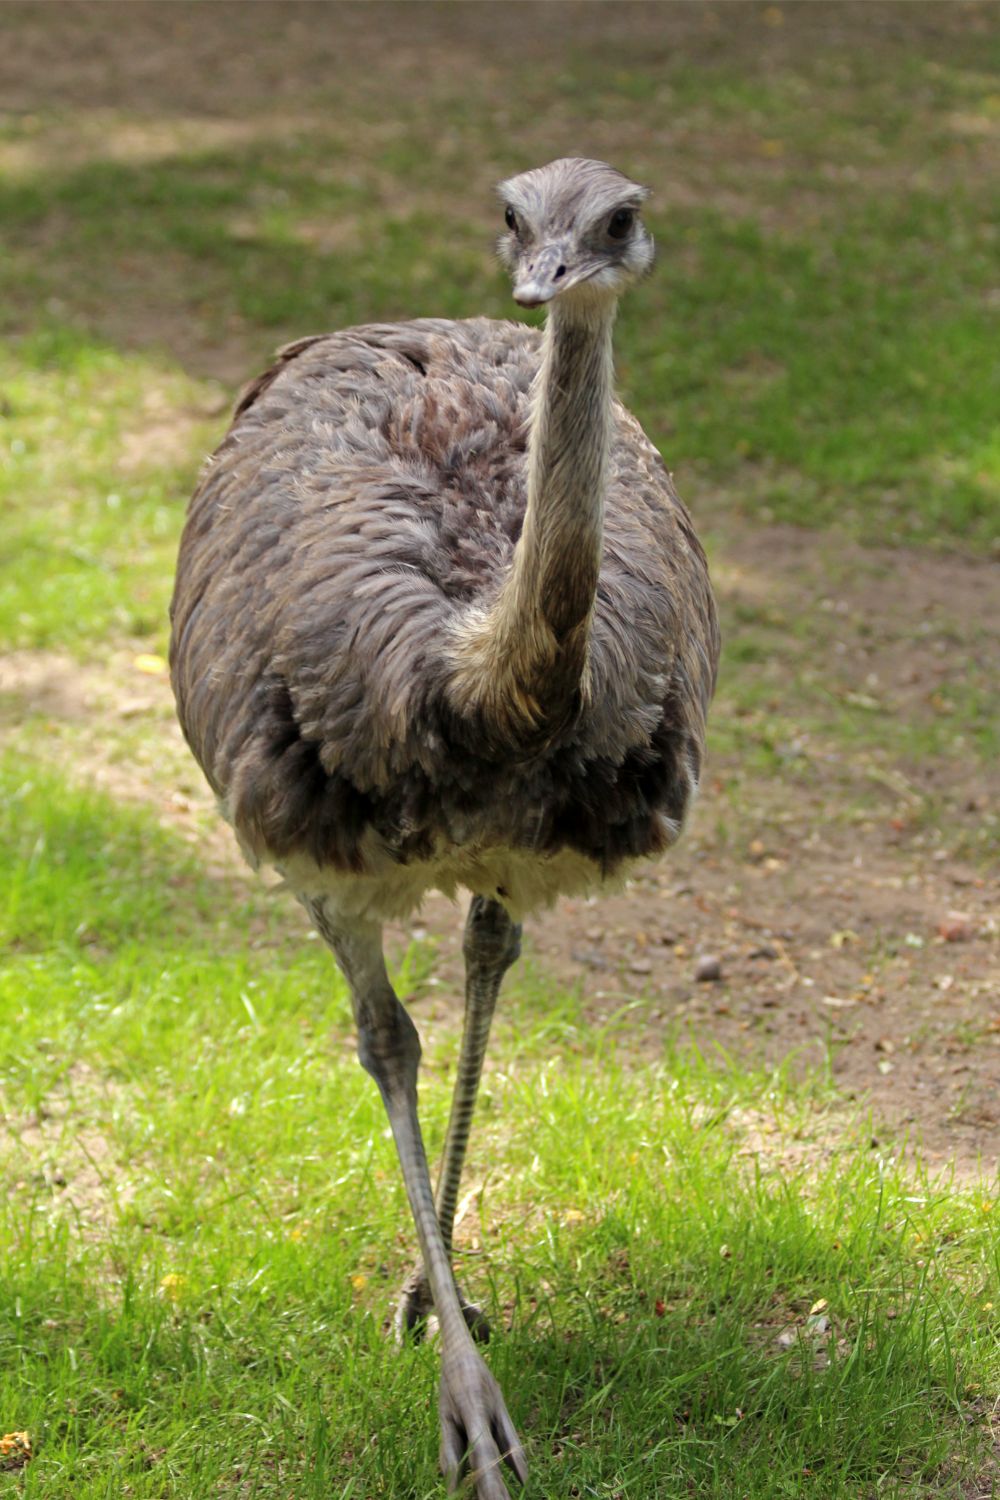 What do captive emus at different ages eat?